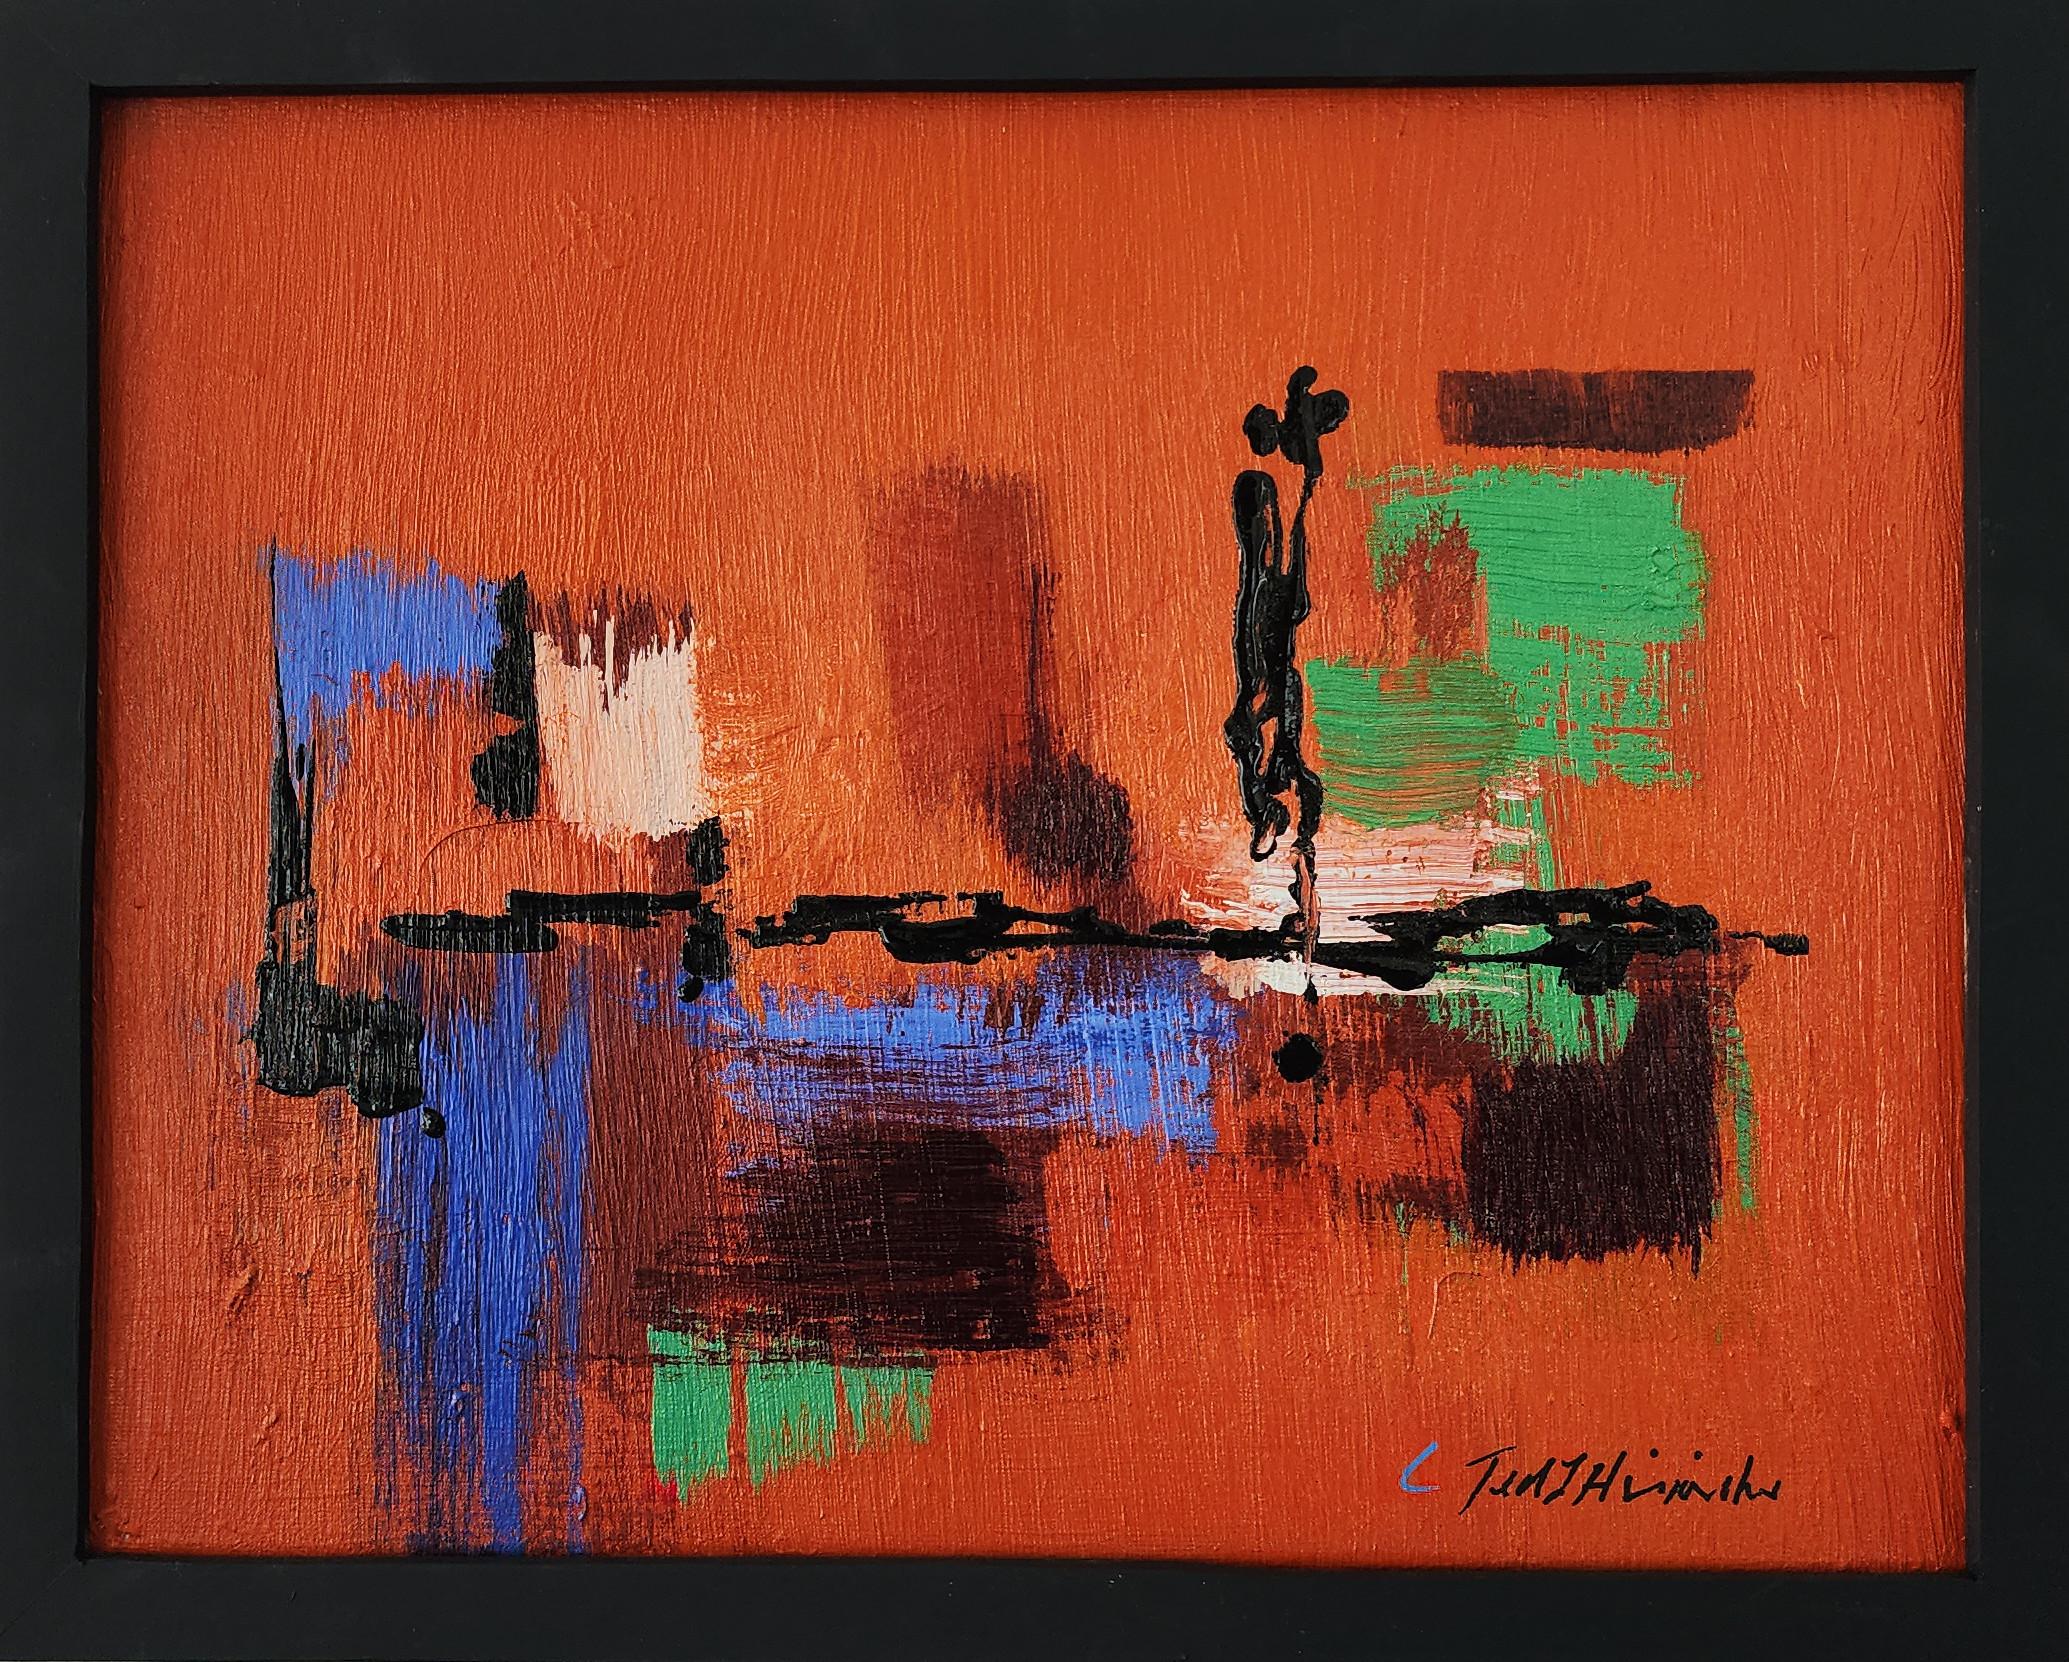 Ted Hinrichs Abstract Painting - Oaxaca (Abstract, Acrylic, Orange, Red, Blue, Green, Black, Minimal)